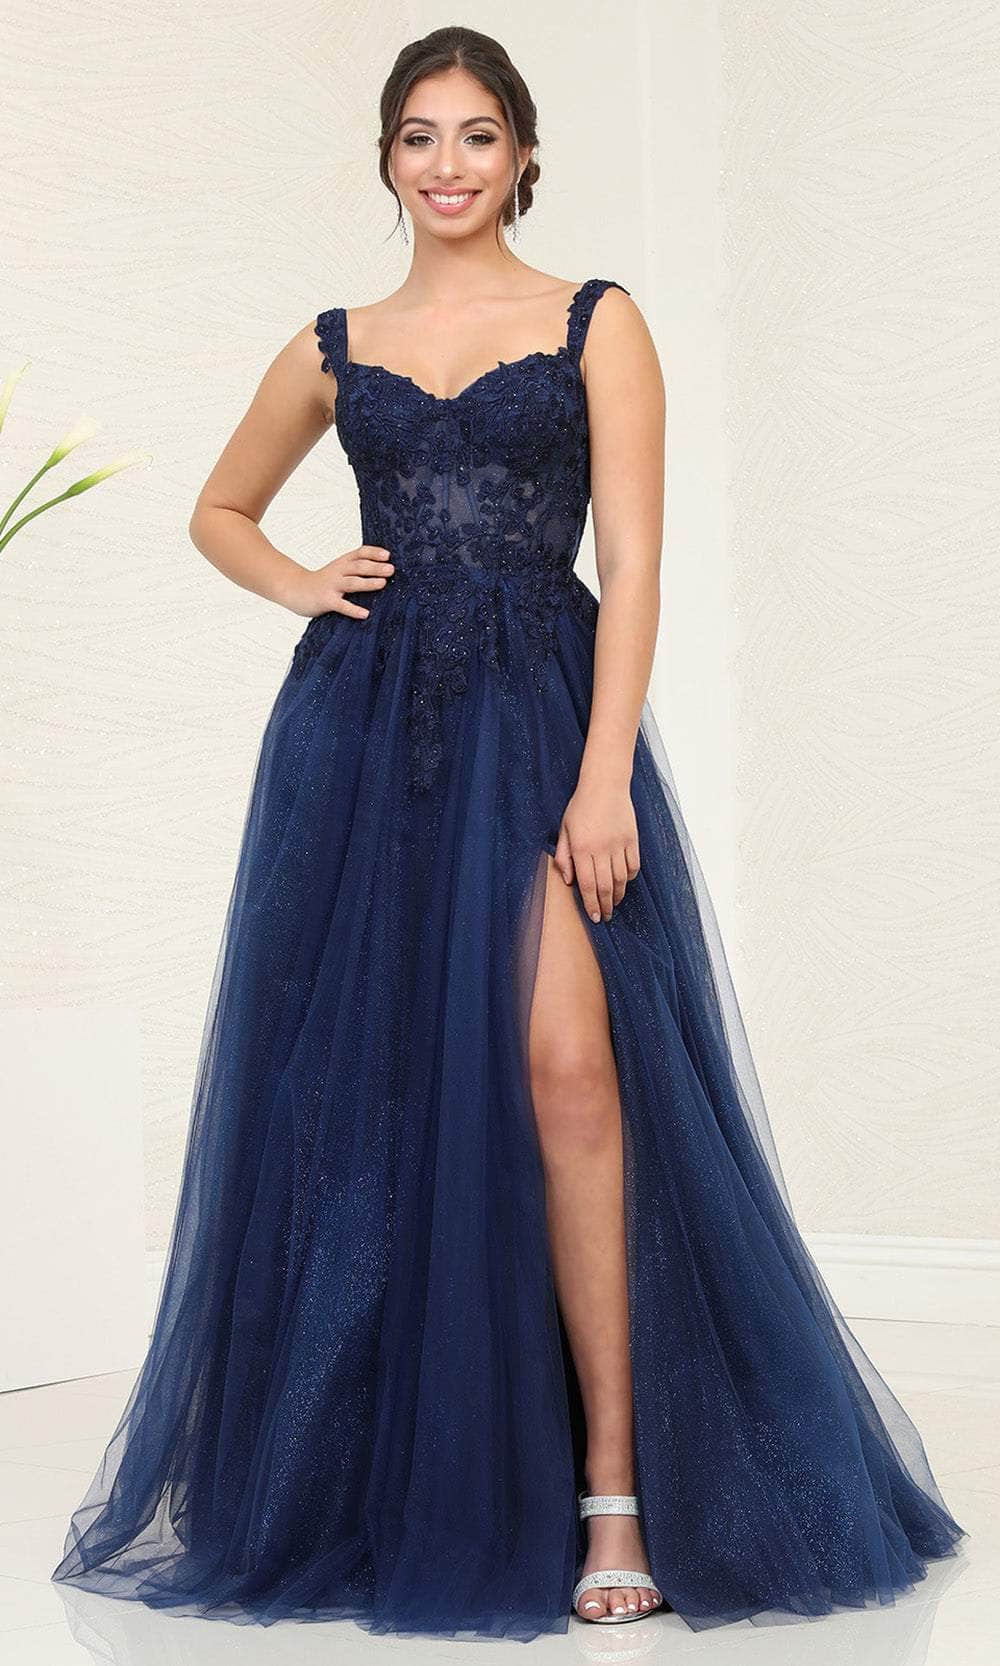 May Queen MQ2053 - Sweetheart Embellished Prom Gown Prom Dresses 4 / Navy